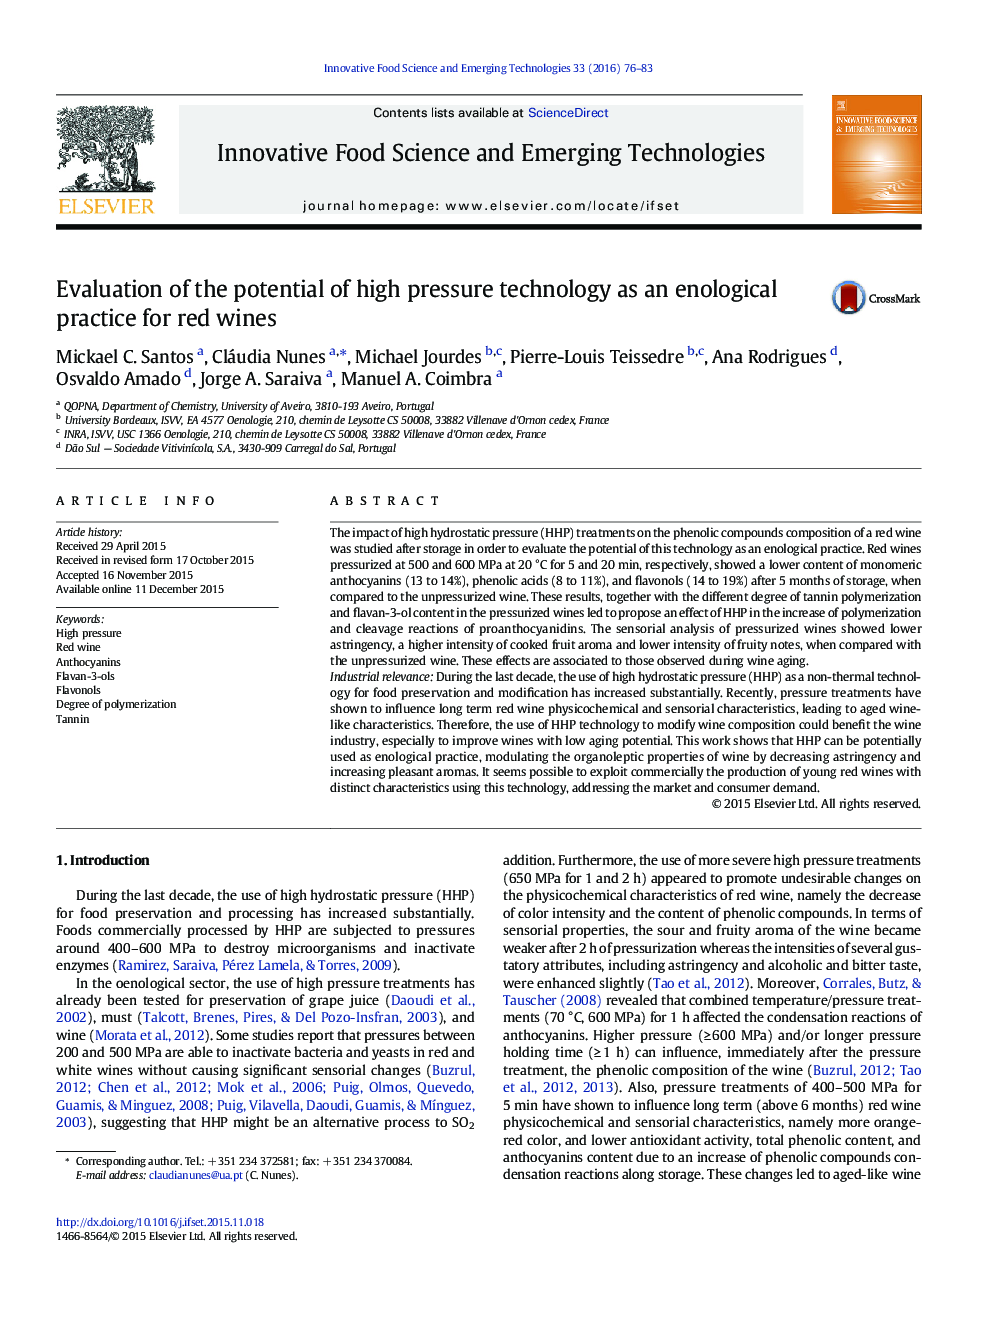 Evaluation of the potential of high pressure technology as an enological practice for red wines